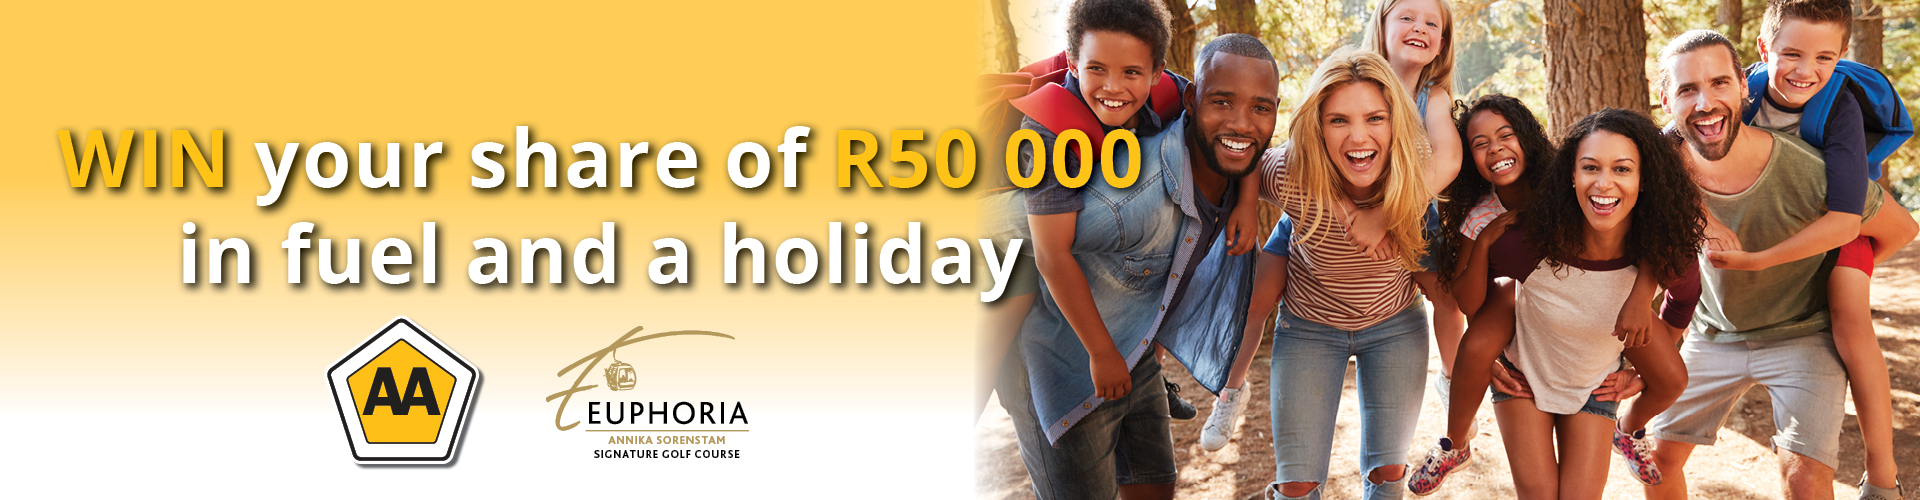 Win your Share of R50 000 in fuel and a holiday!